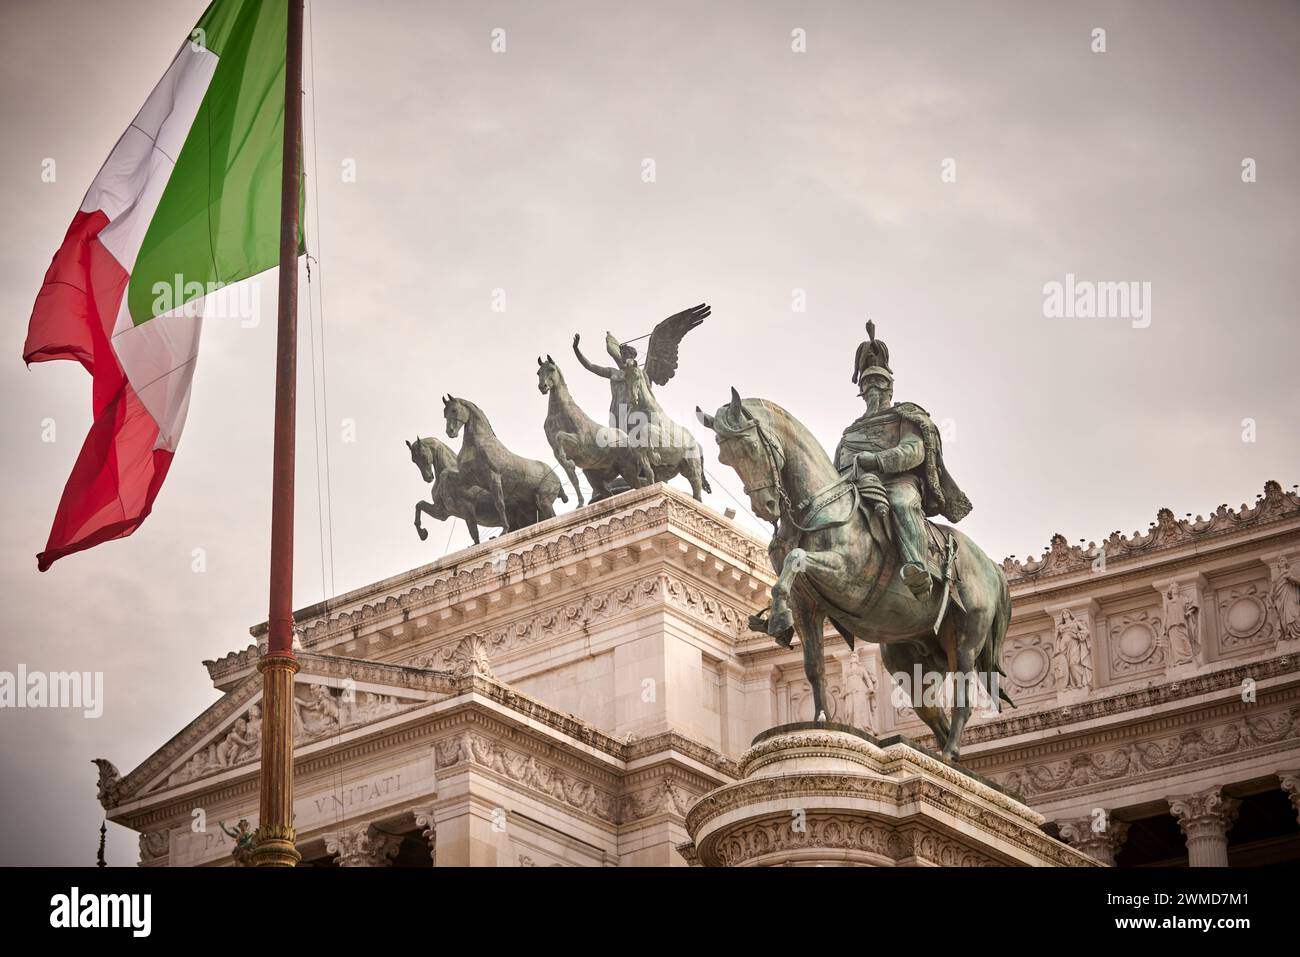 Grand marble neoclassical temple Monument to Victor Emmanuel II and Equestrian statue of Vittorio Emanuele II in Rome, Italy. Stock Photo